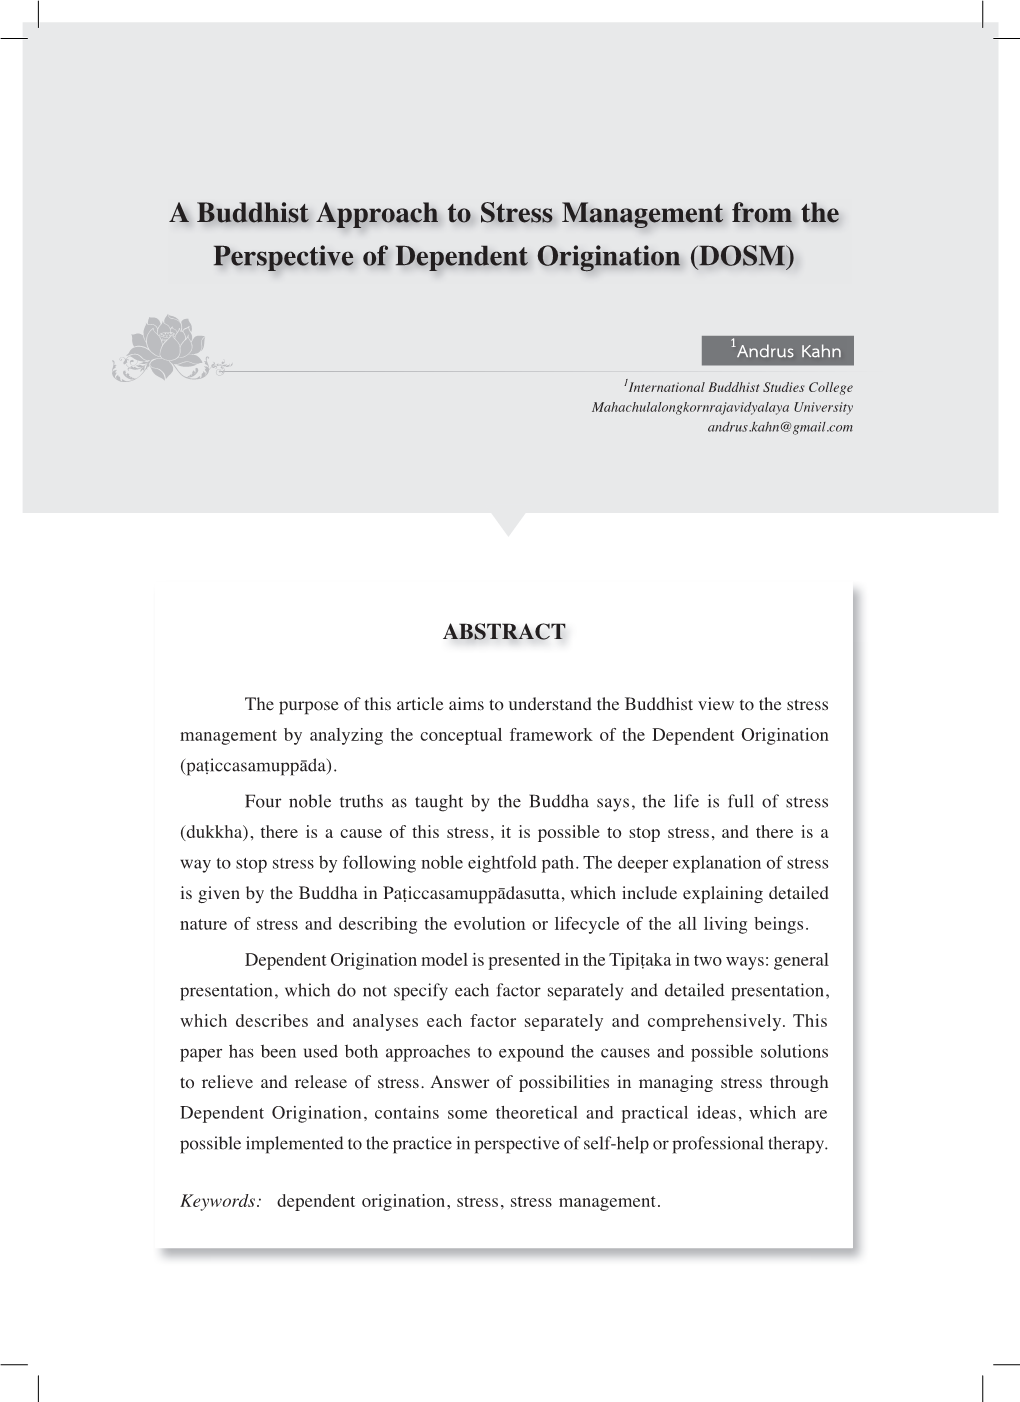 A Buddhist Approach to Stress Management from the Perspective of Dependent Origination (DOSM)